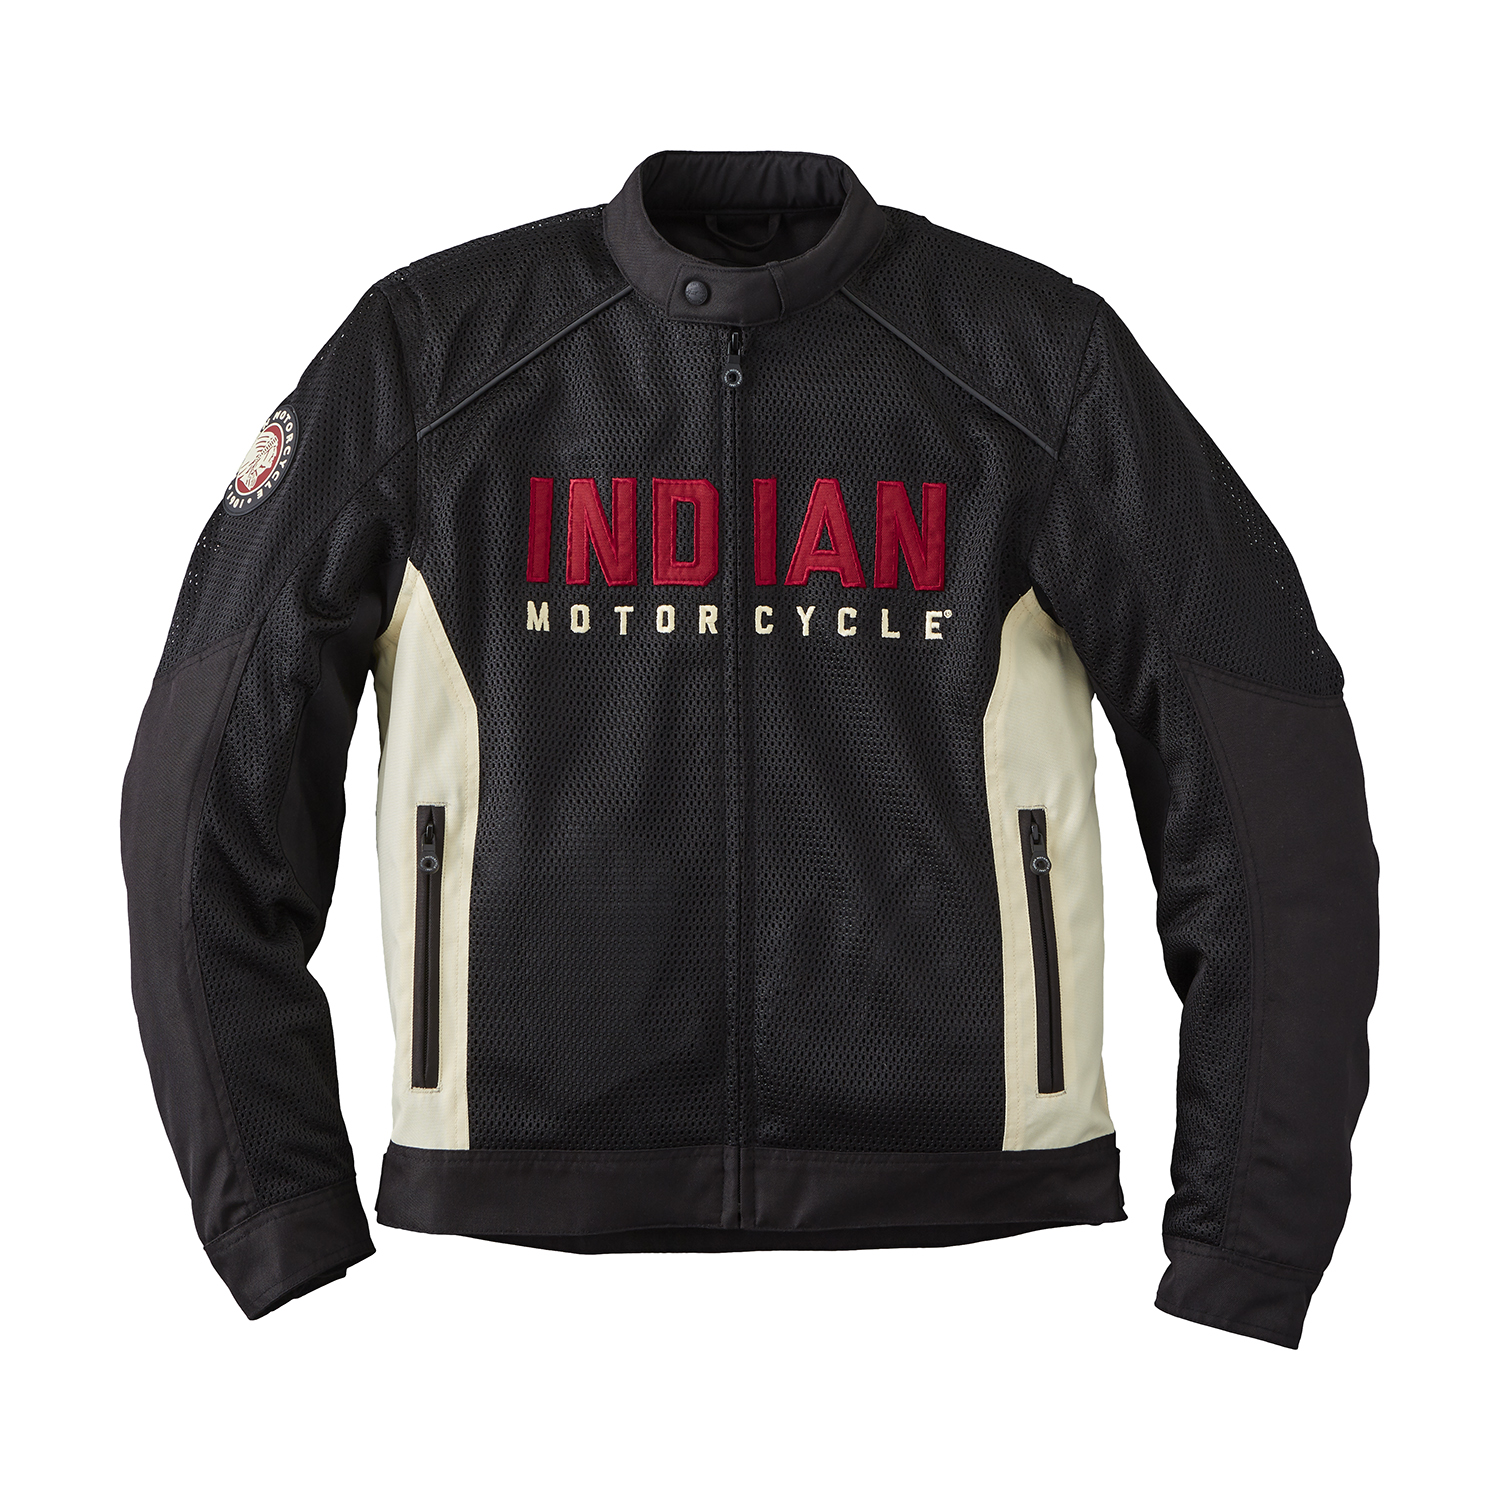 Indian Motorcycle Men's Mesh Lightweight 2 Riding Jacket with Removable Liner Black